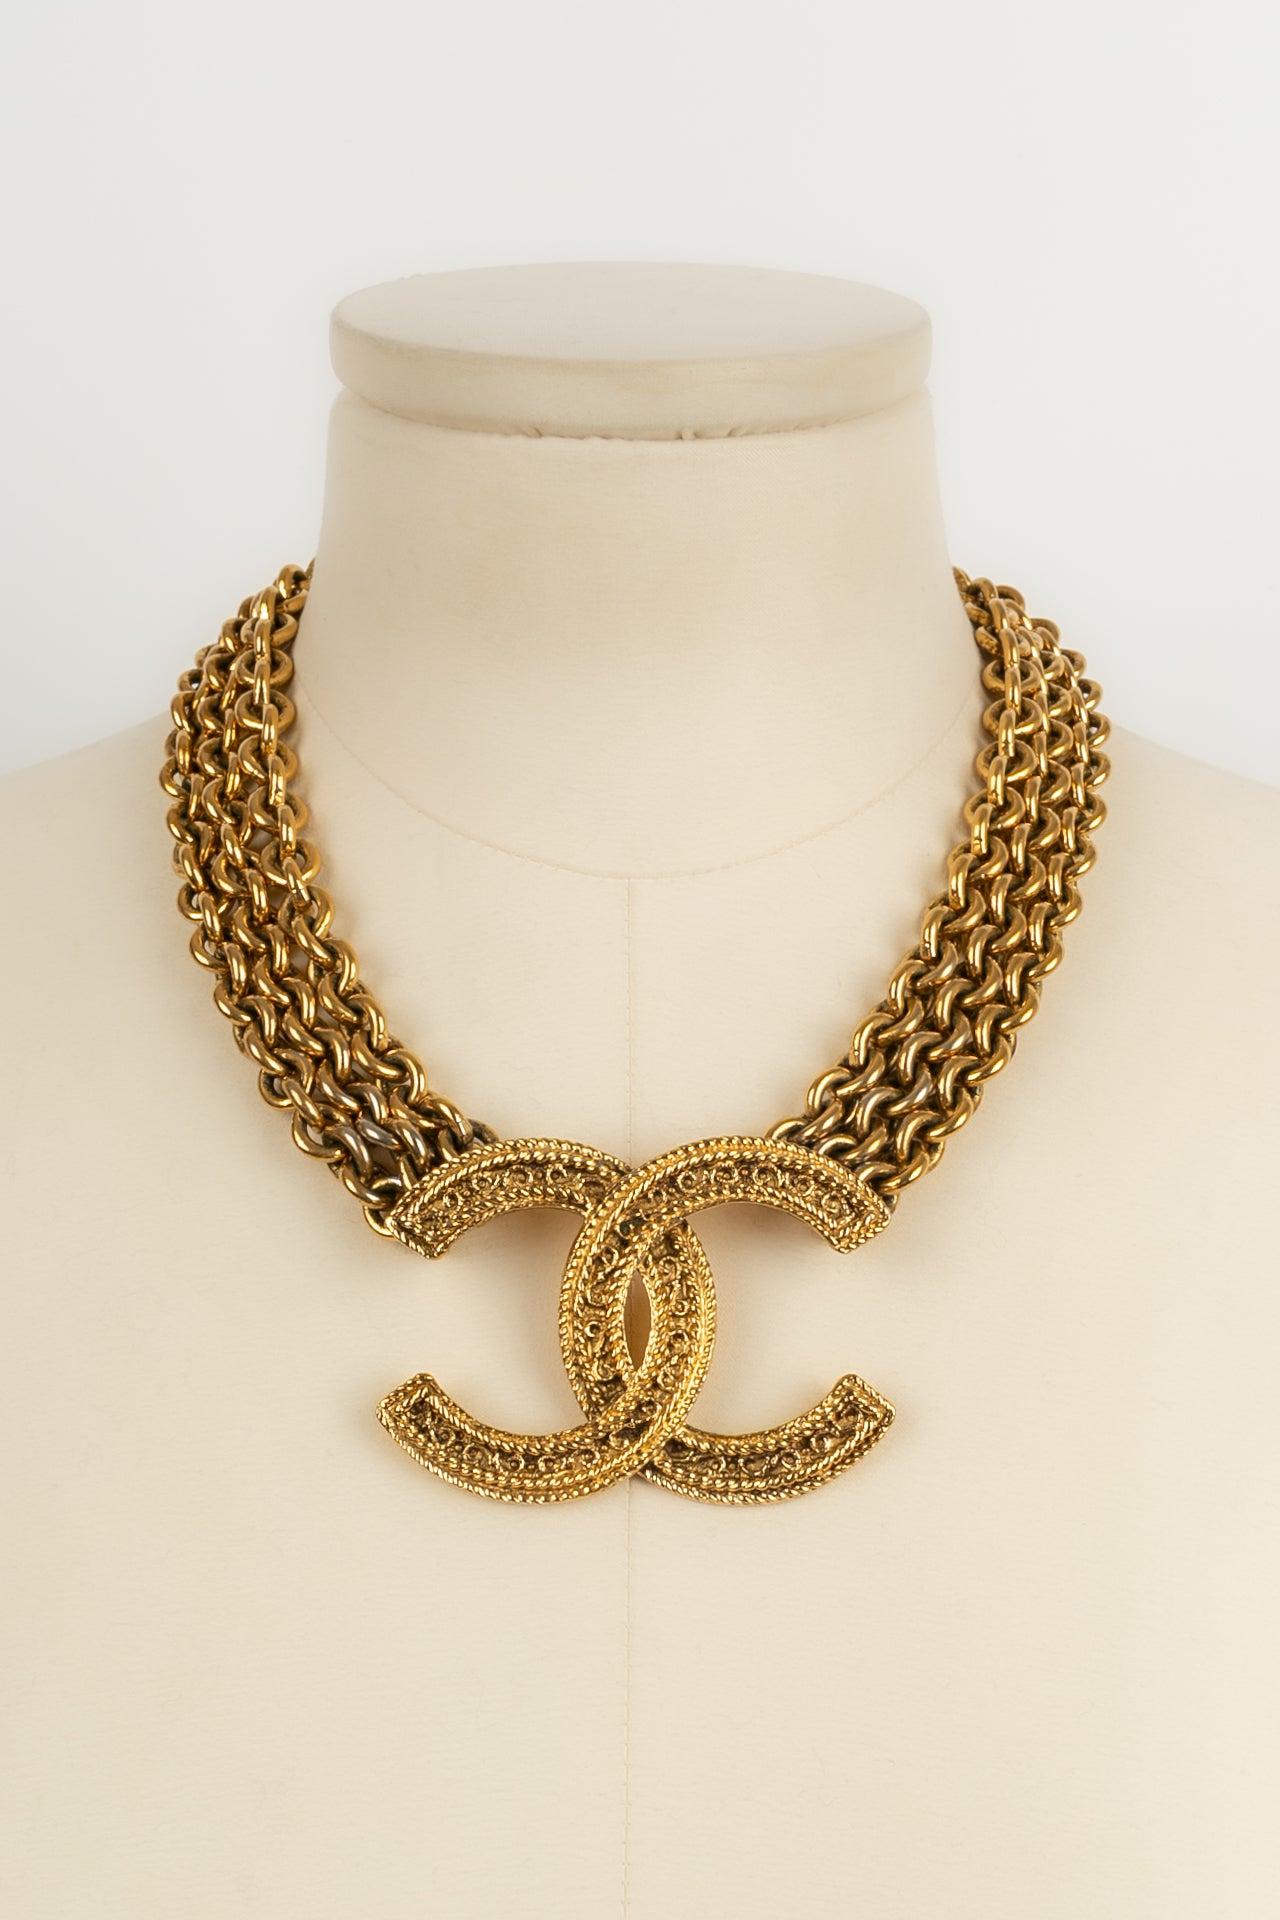 Women's Chanel Necklace in Three Gold Metal Chains with Central CC Pendant For Sale